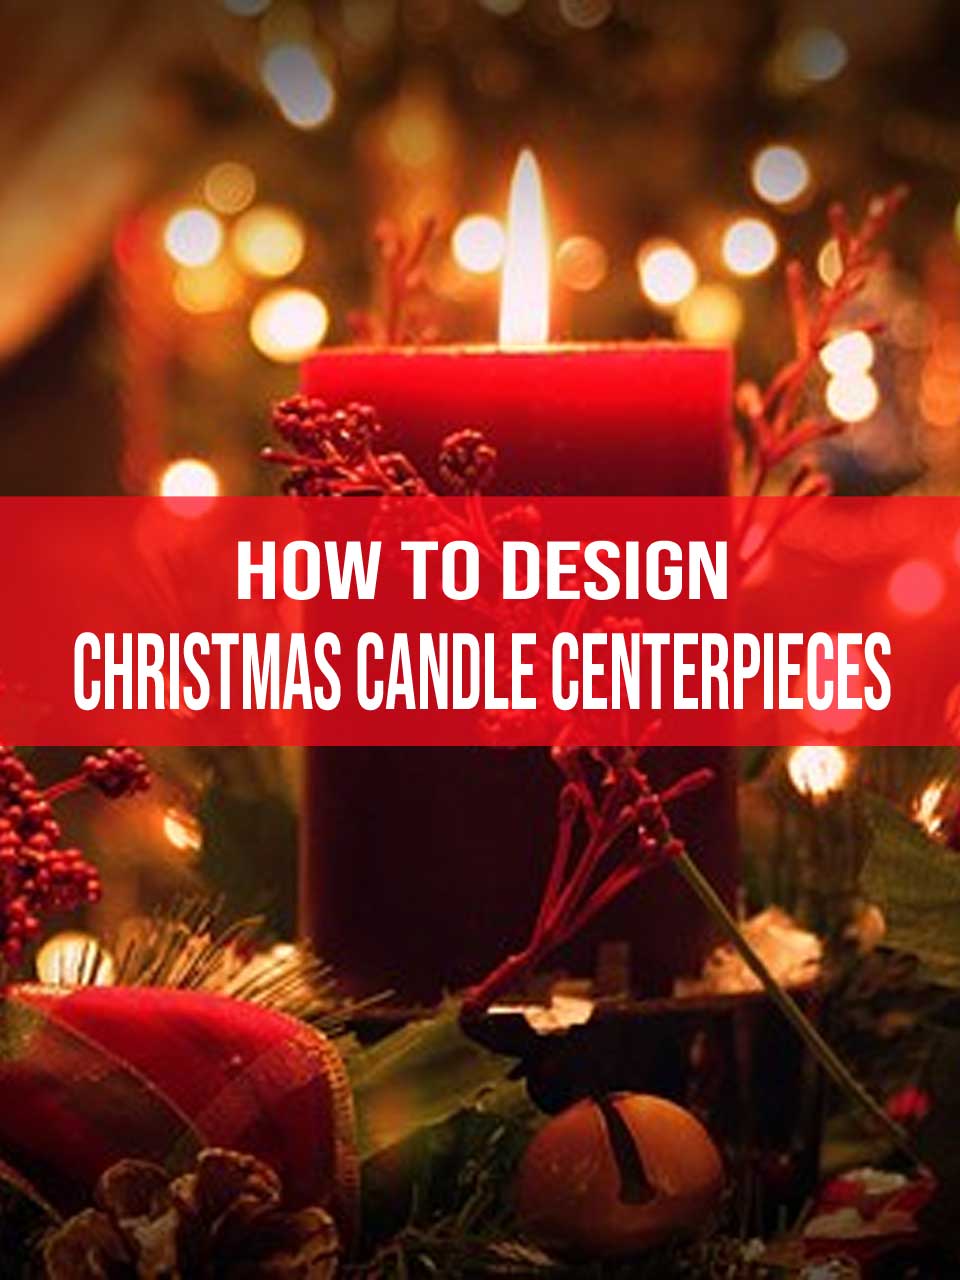 Christmas candle centerpieces